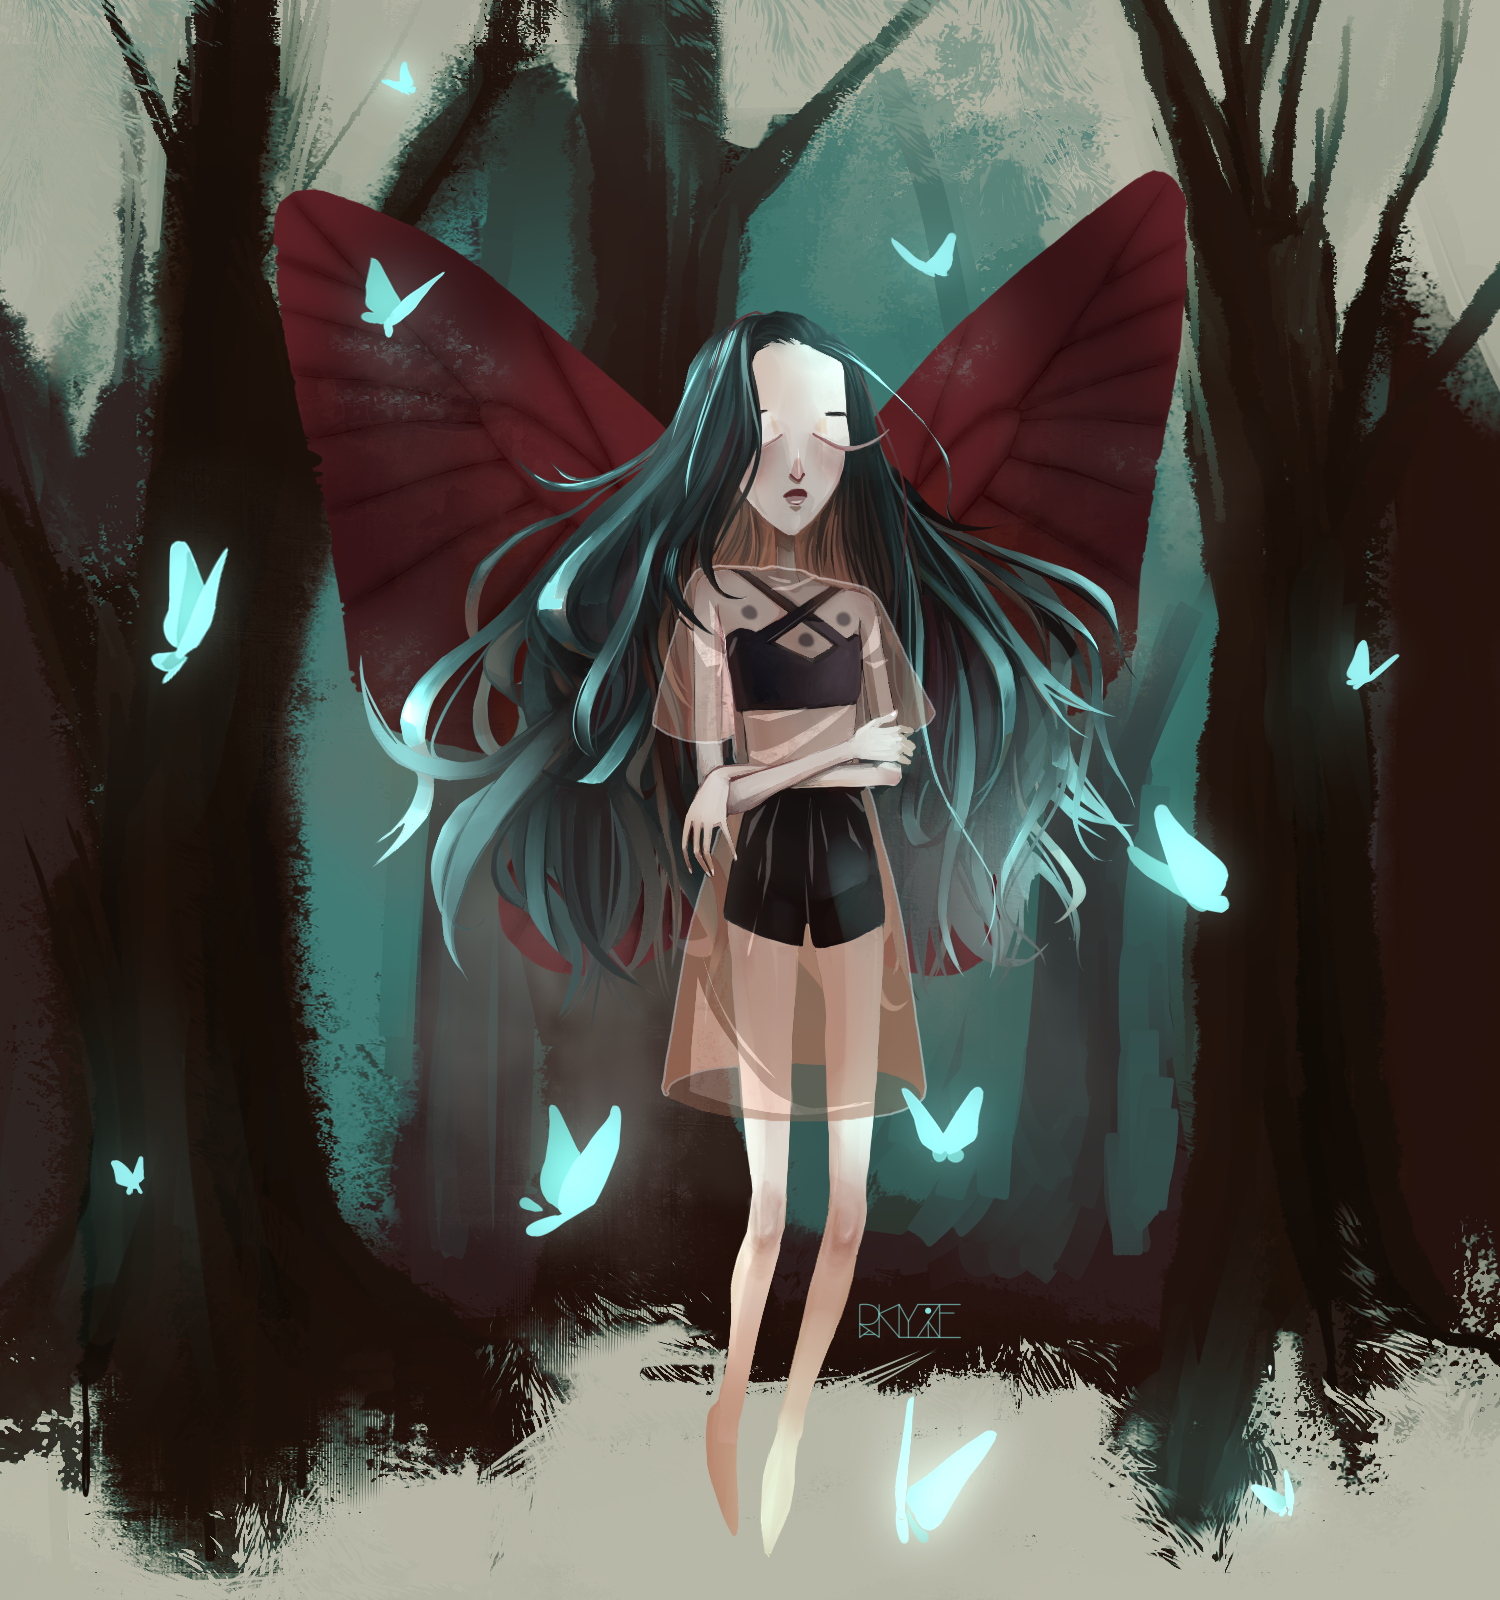 Trade with one girl - My, Girl, Fairy, Art, Drawing, Trade, Butterfly